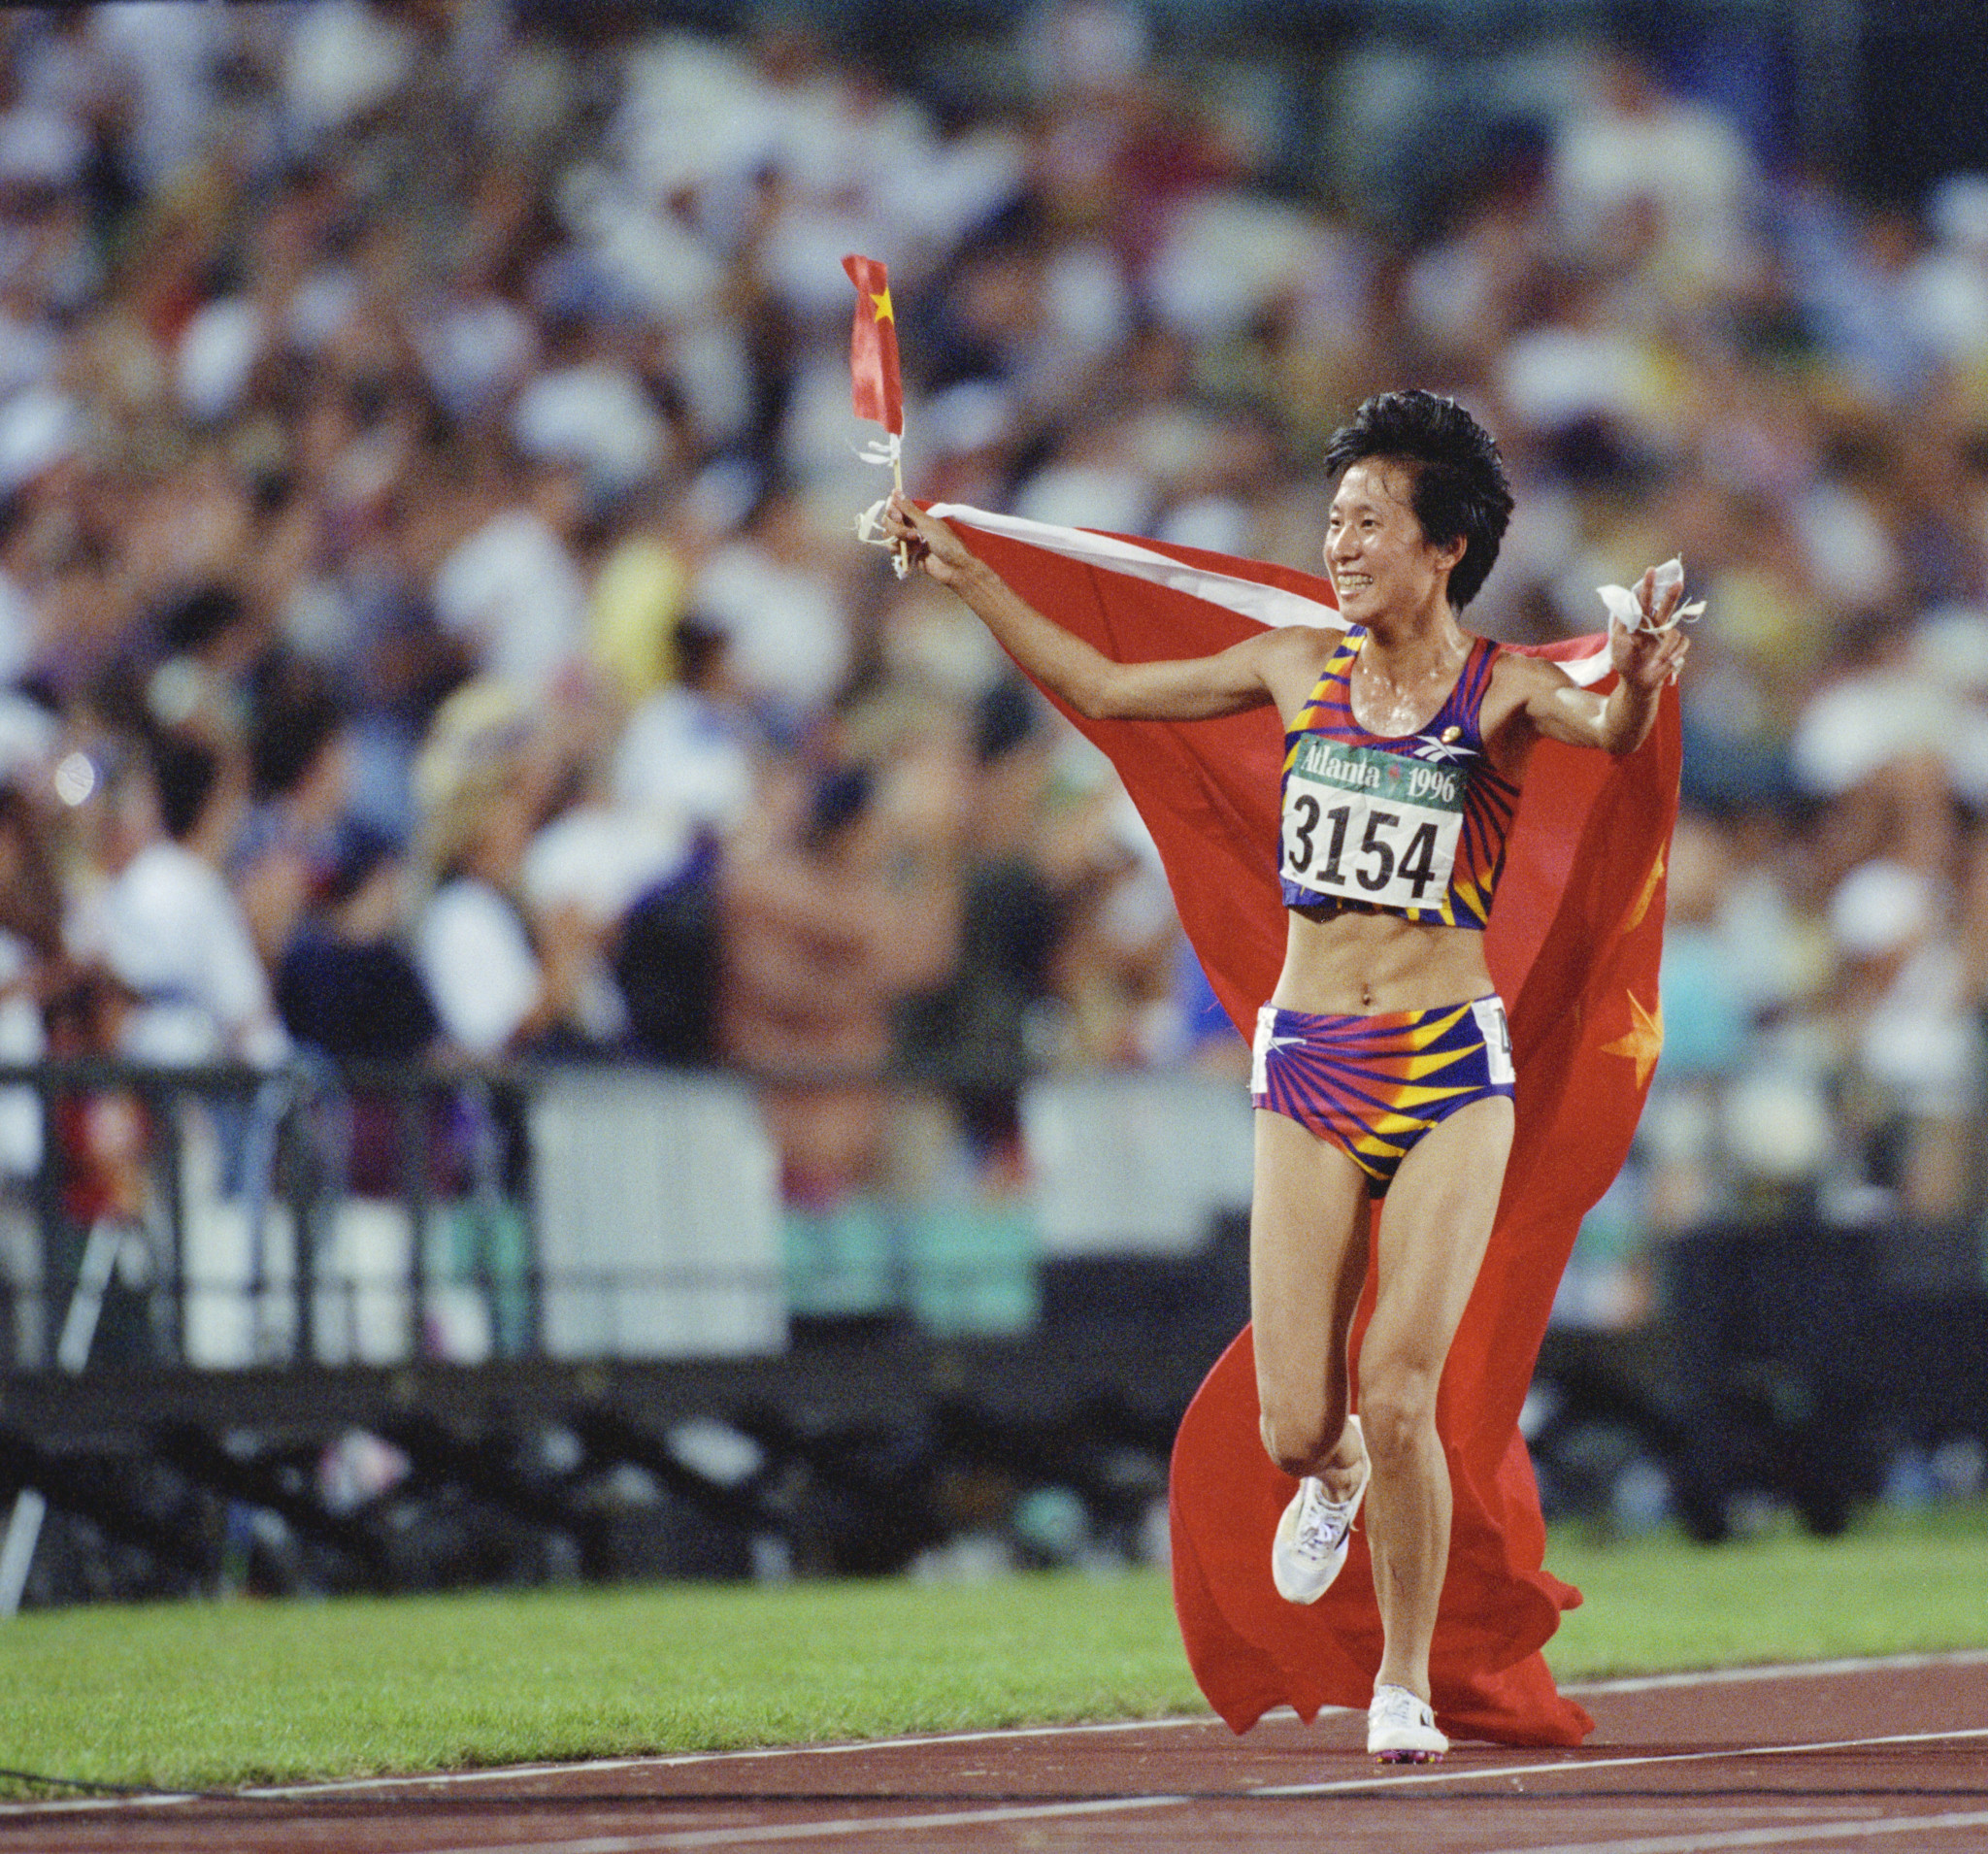 Wang Junxia, who seemingly admitted to doping during her career in a letter last year, beat Paula Radcliffe in the 5,000m at Atlanta 1996 and set a world record for the 10,000m that stood for 23 years ©Getty Images